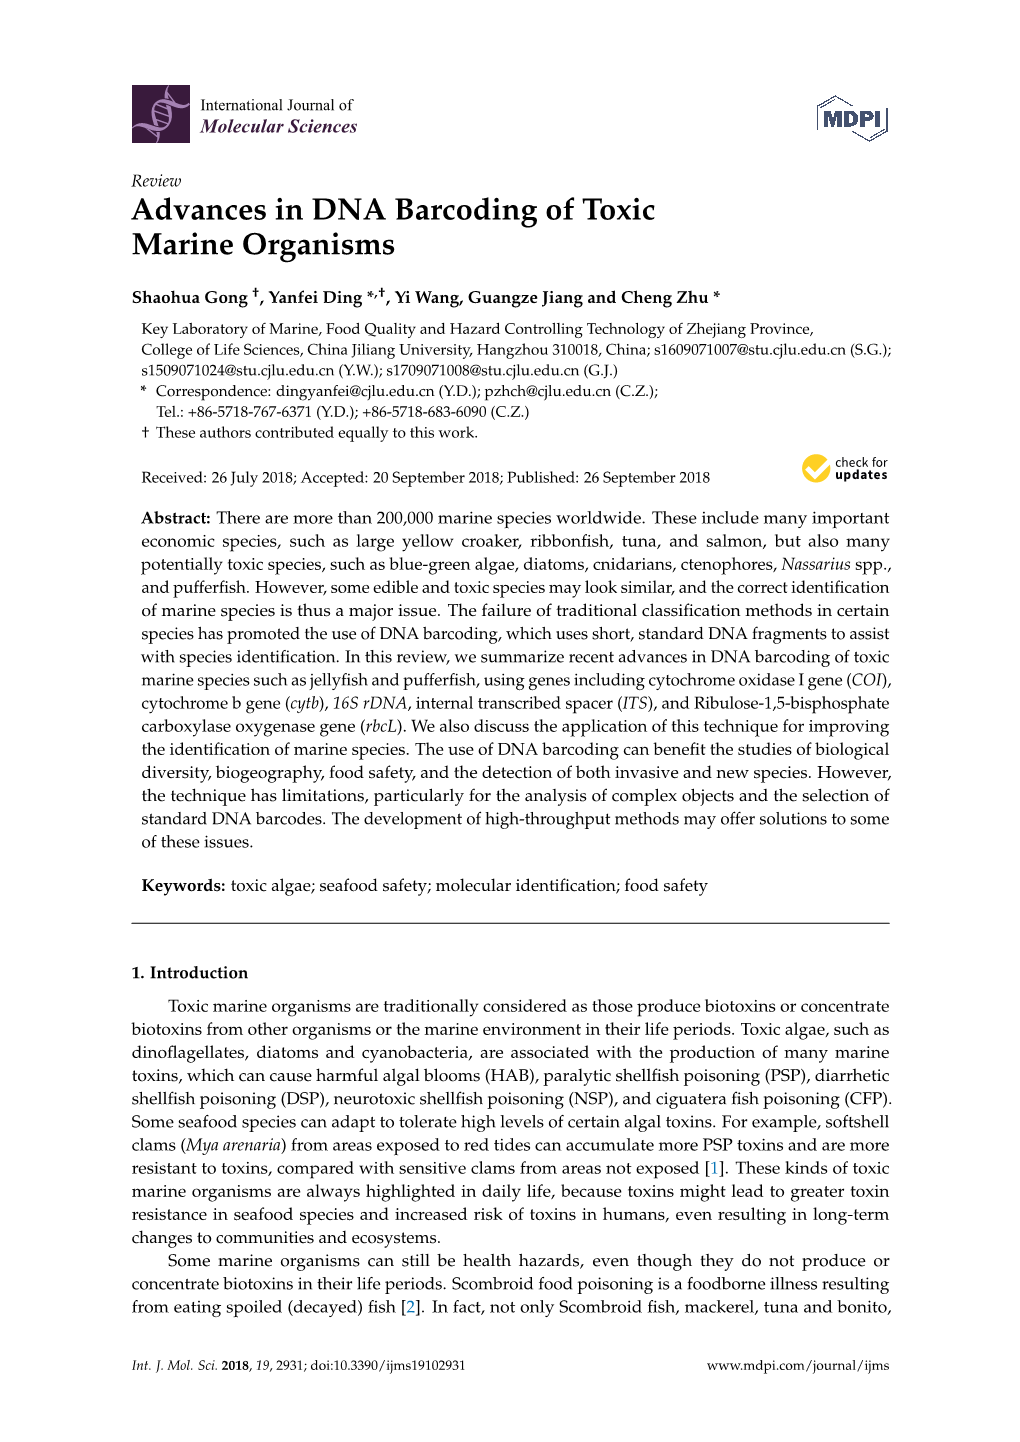 Advances in DNA Barcoding of Toxic Marine Organisms